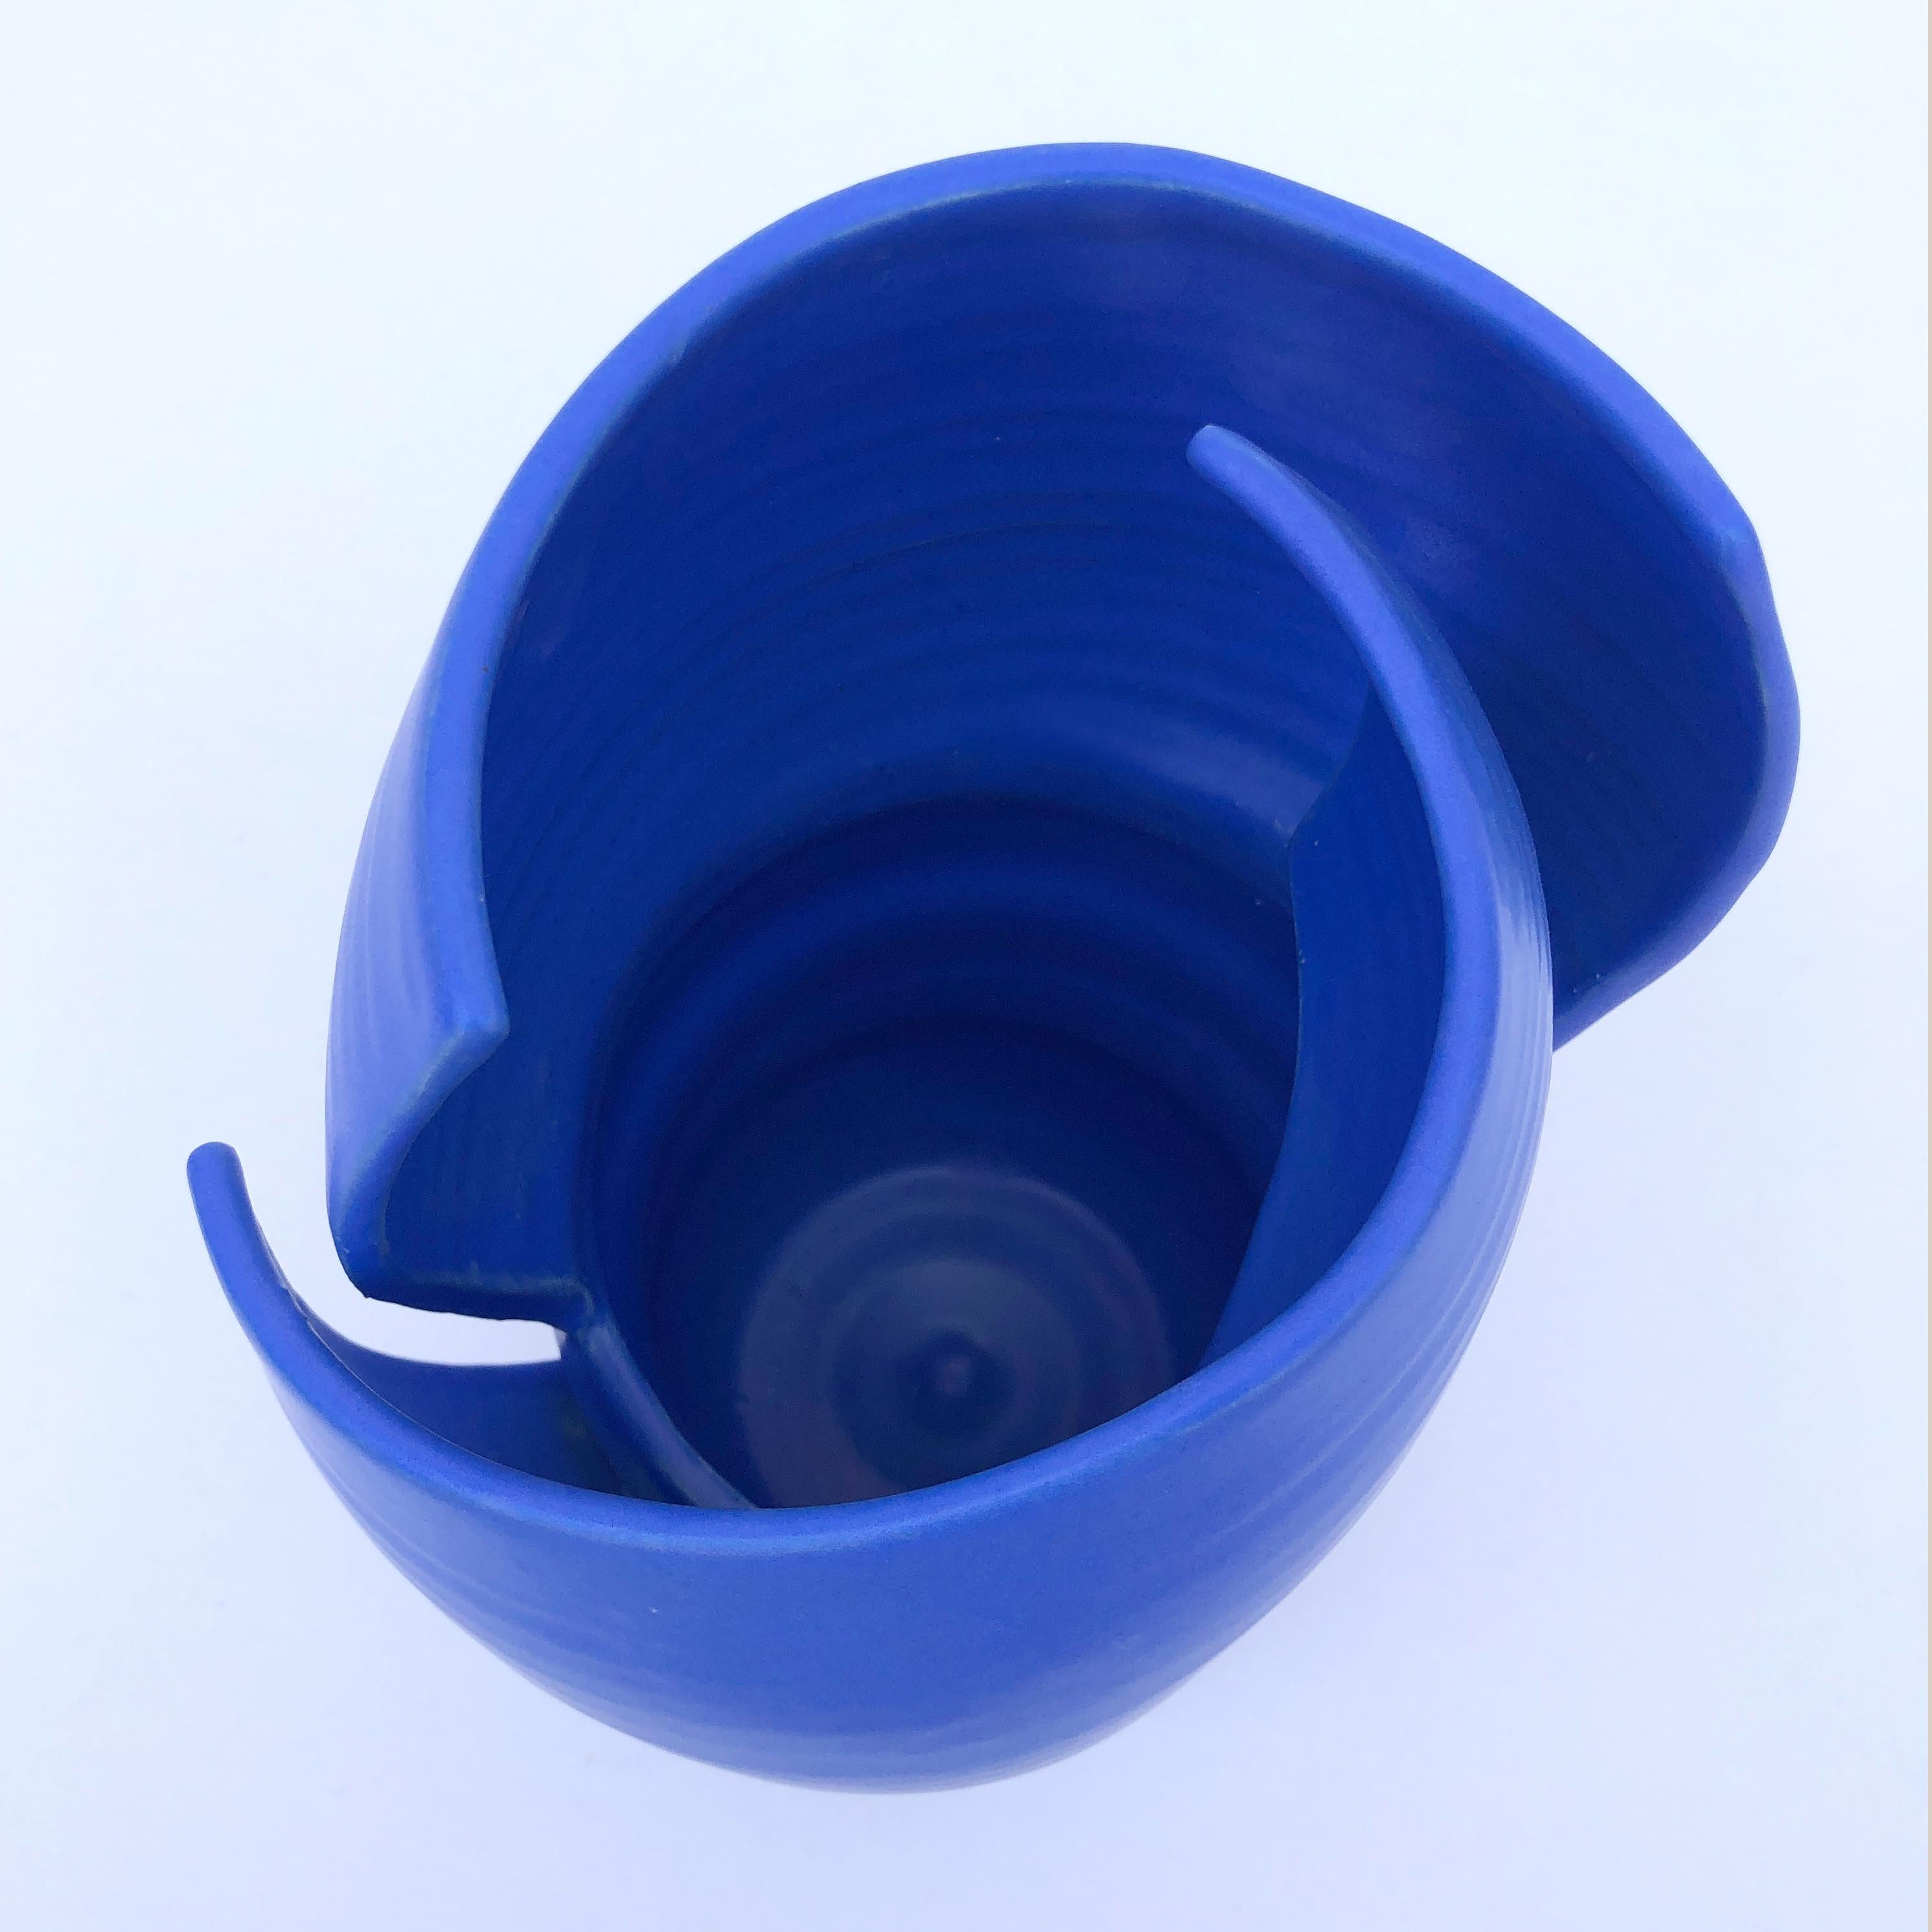 Fired Electric Blue Helix Vase Handmade in Barcelona by Niho Ceramics For Sale